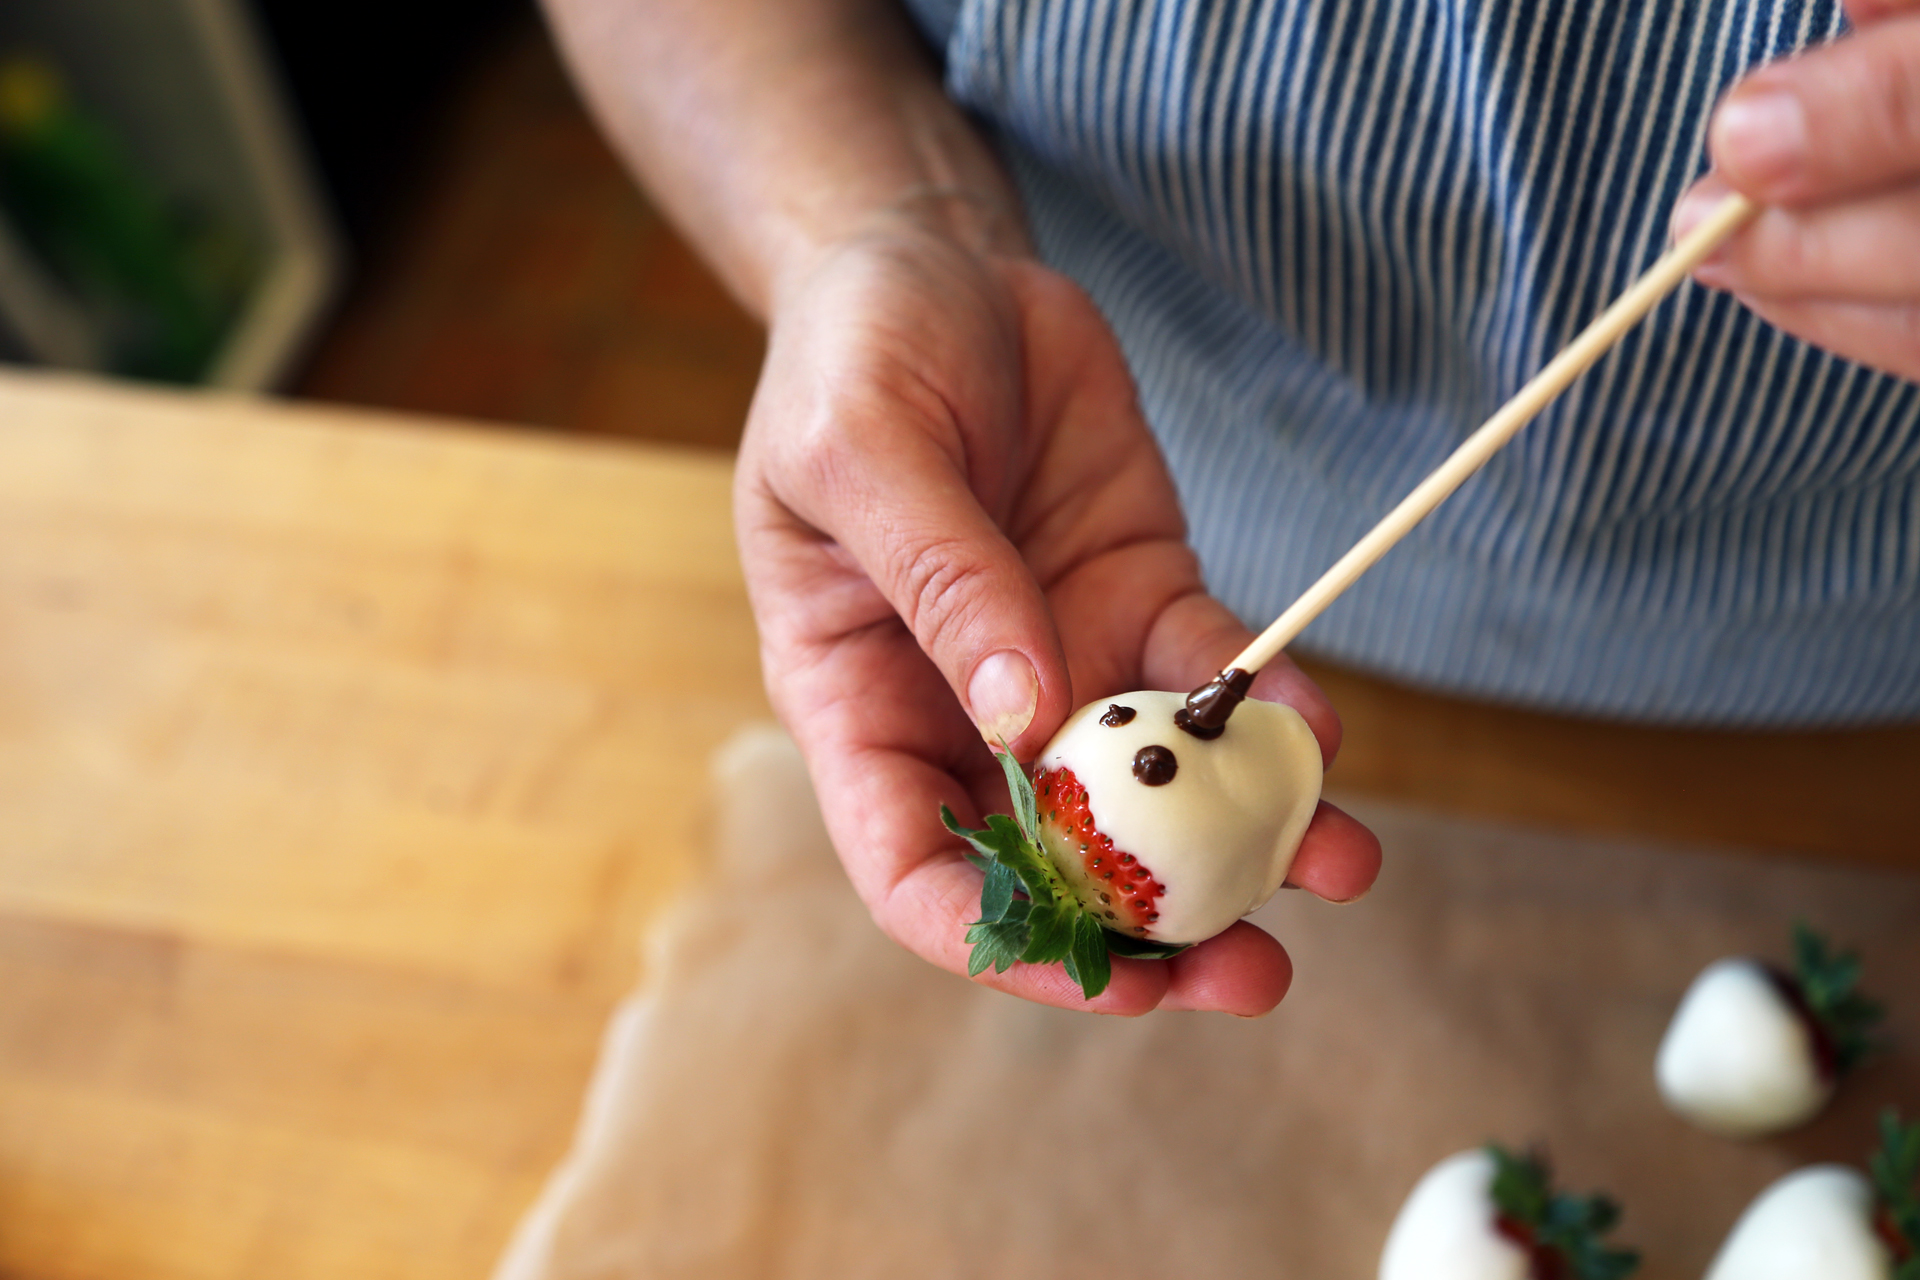 Using a toothpick or wooden skewer, draw eyes and a ghoulish mouth on each strawberry.